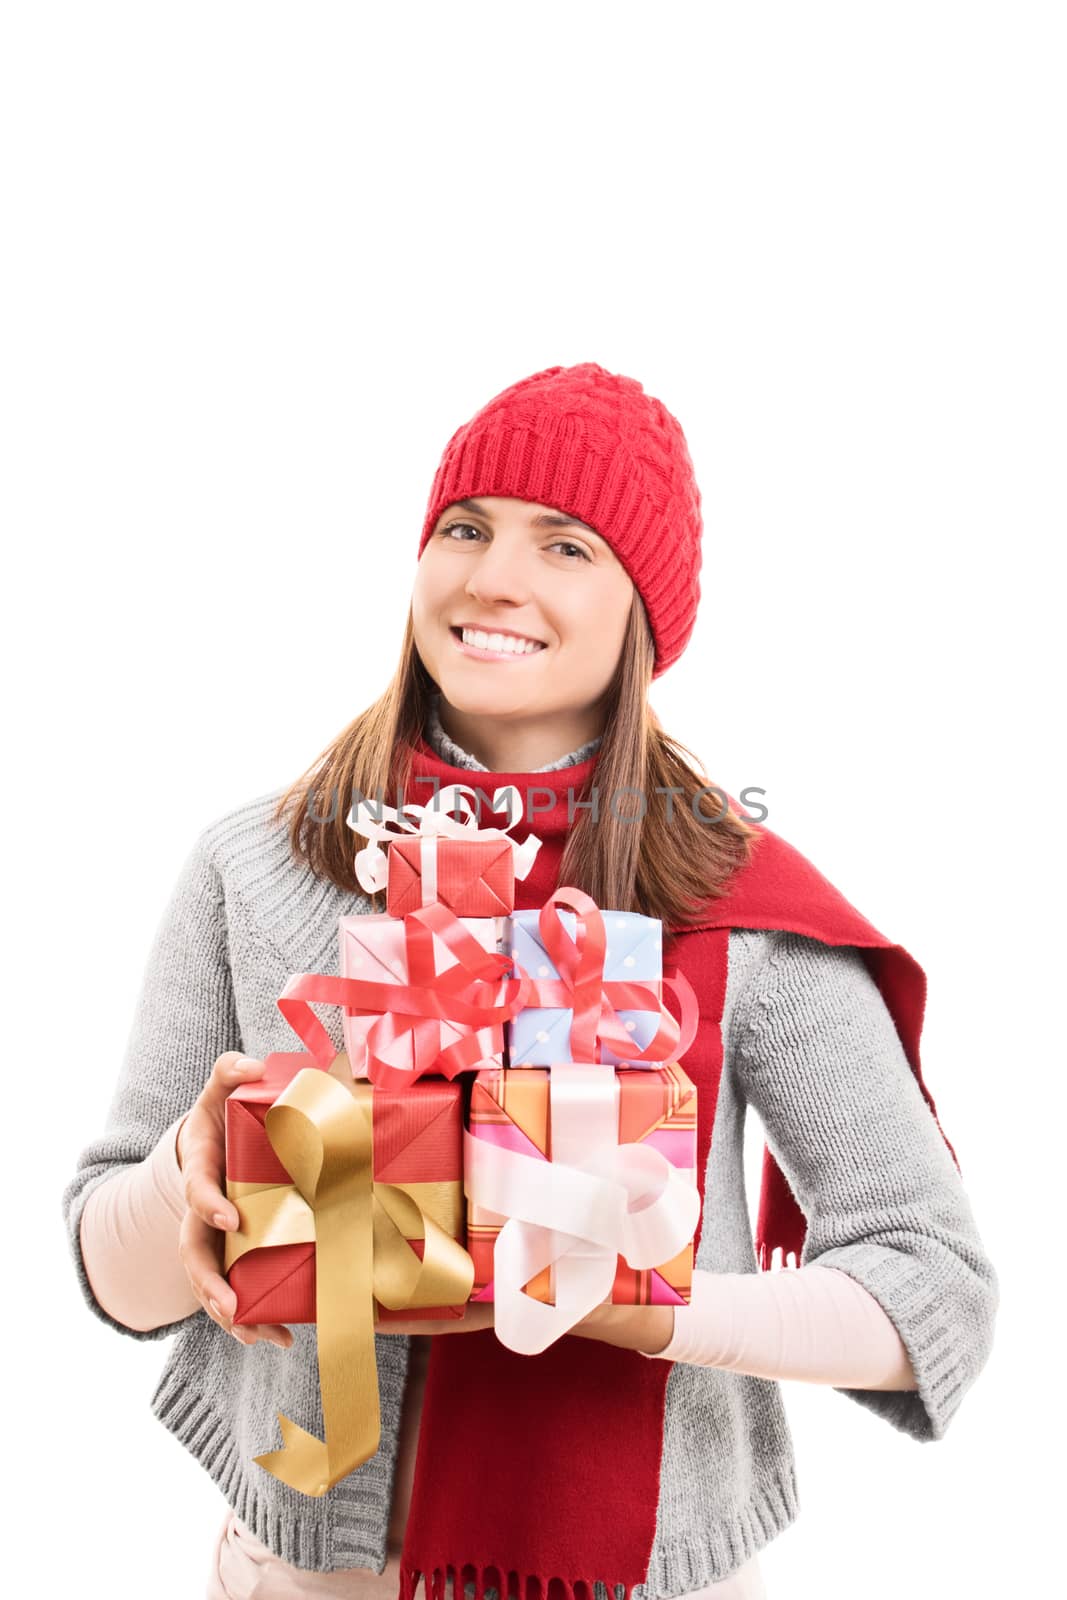 My Christmas shopping is done. Beautiful young woman in winter clothes holding wrapped presents, isolated on white background.